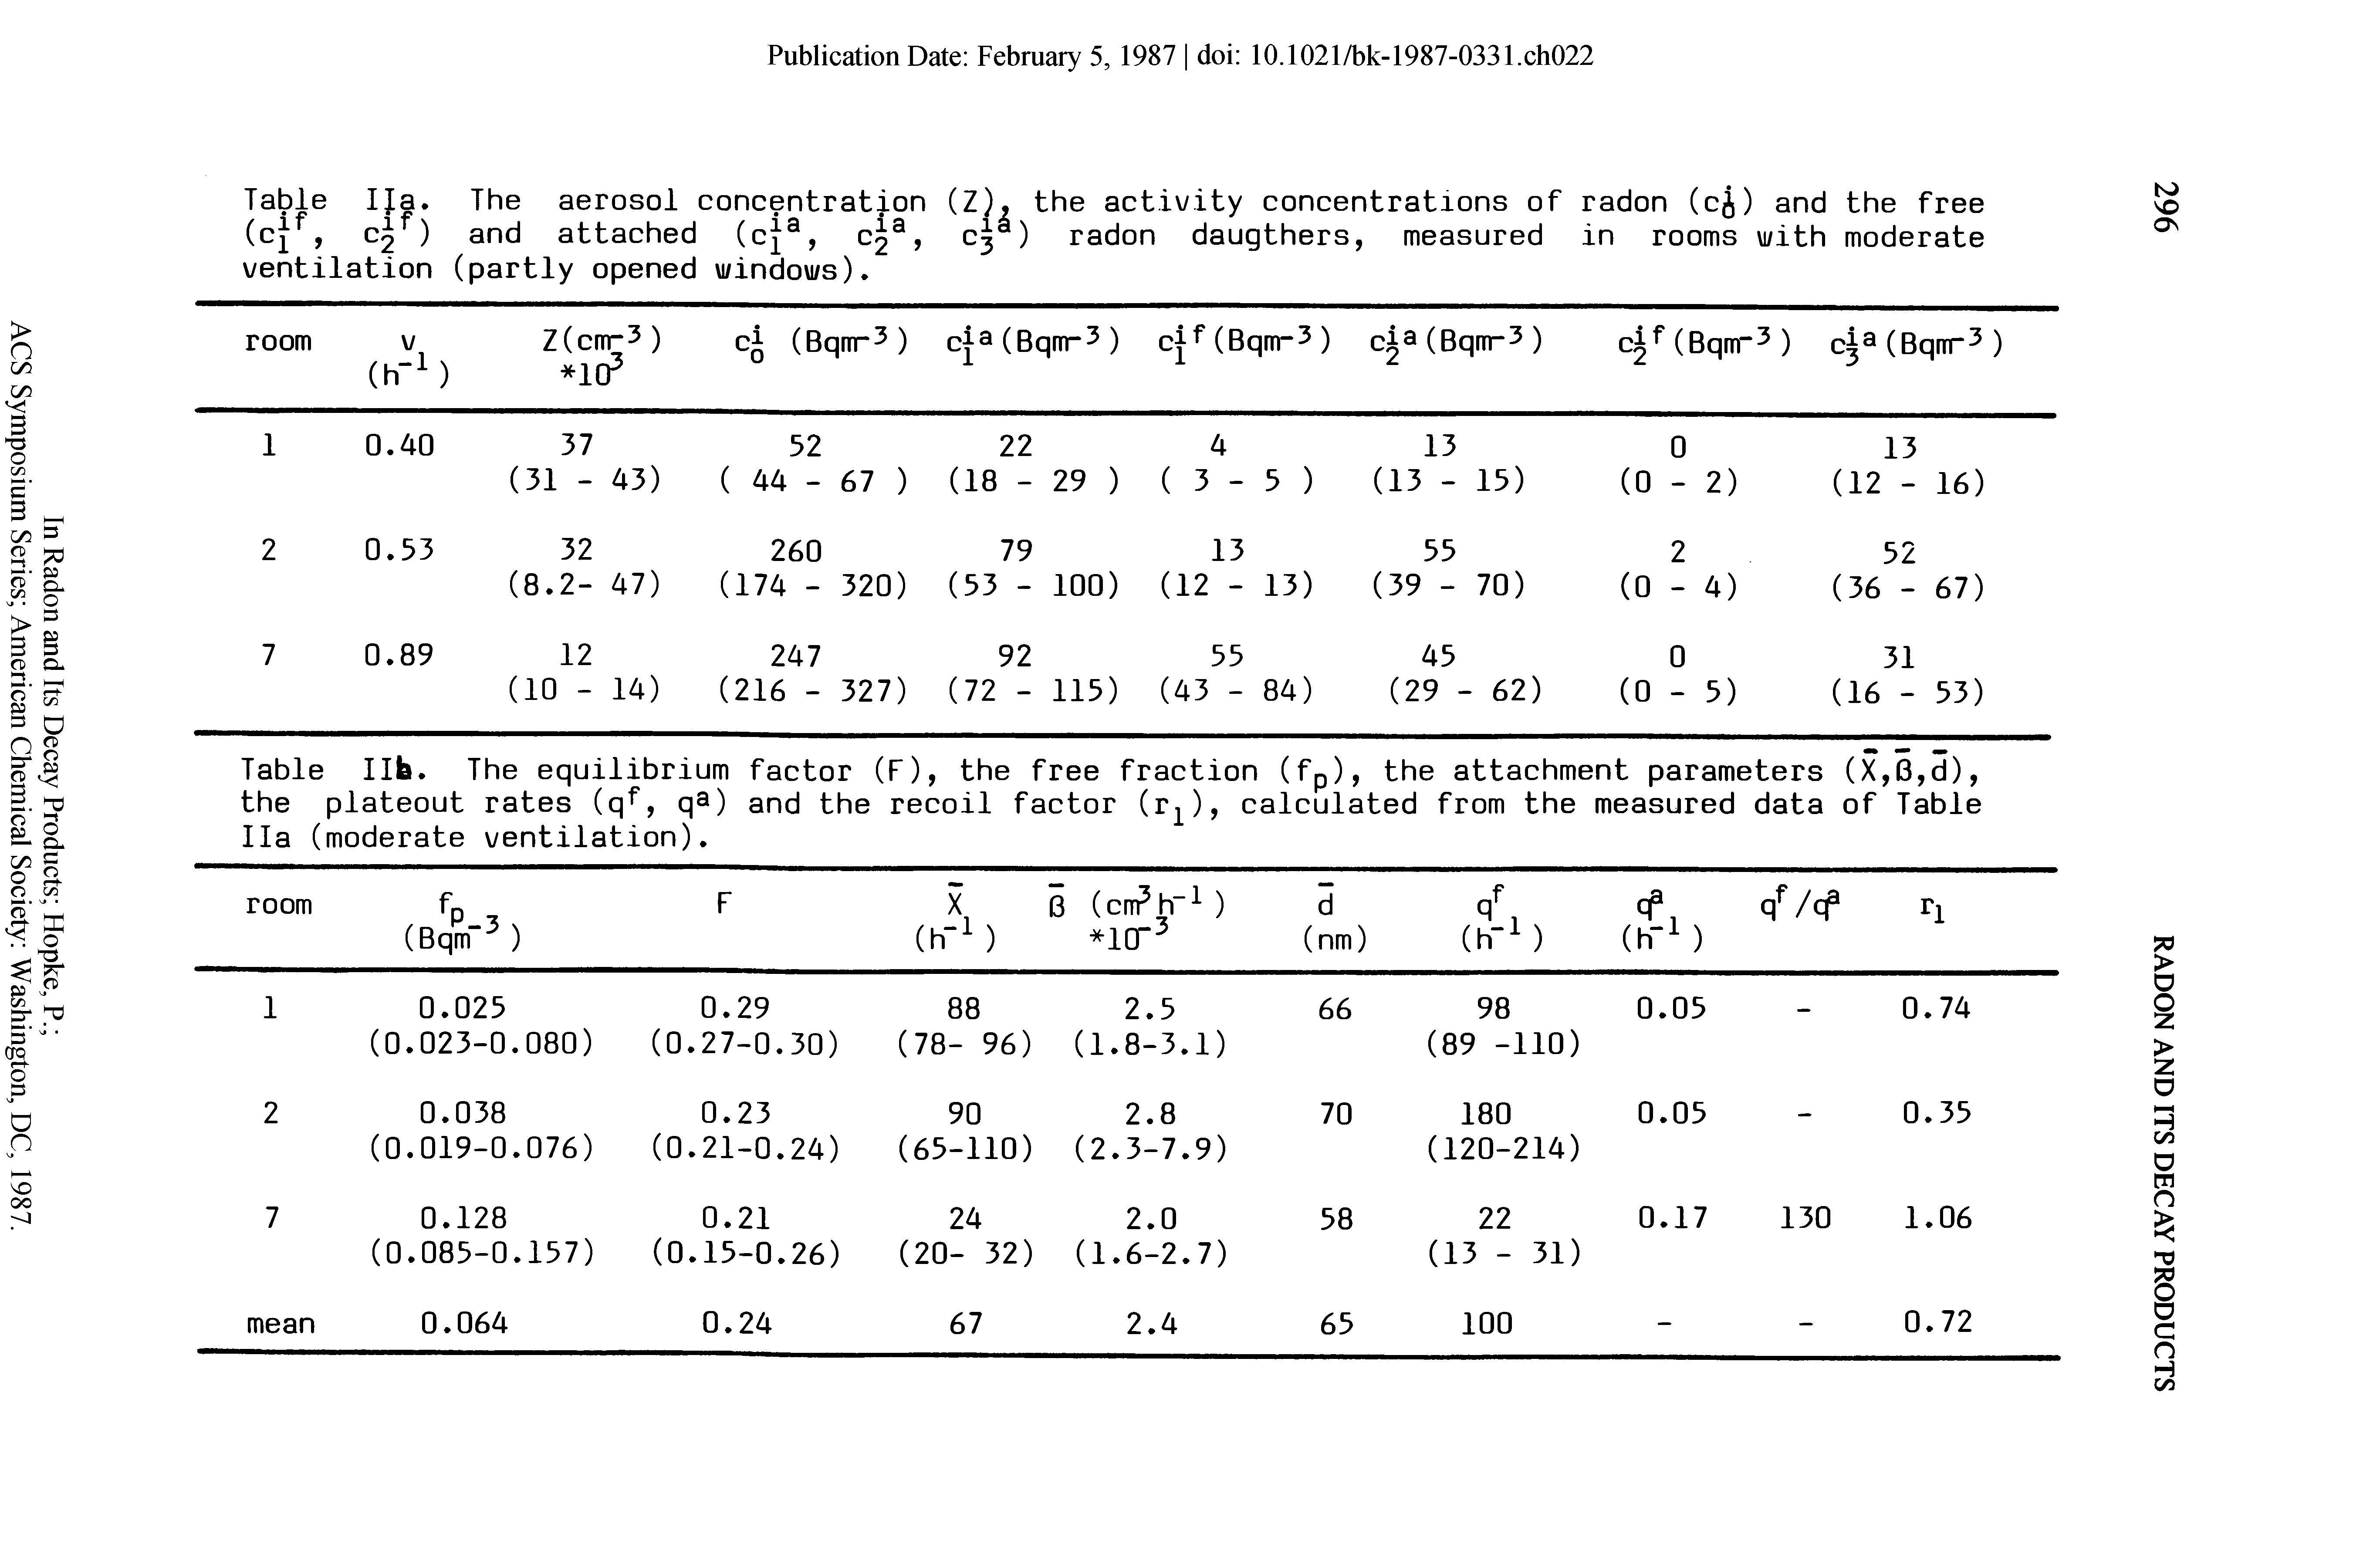 Table IJa. The aerosol concentration (Z), the activity concentrations of radon (cj) and the free (cjf, C2 ) and attached (c a, c 3, C3 ) radon daugthers, measured in rooms i/ith moderate ventilation (partly opened windows).